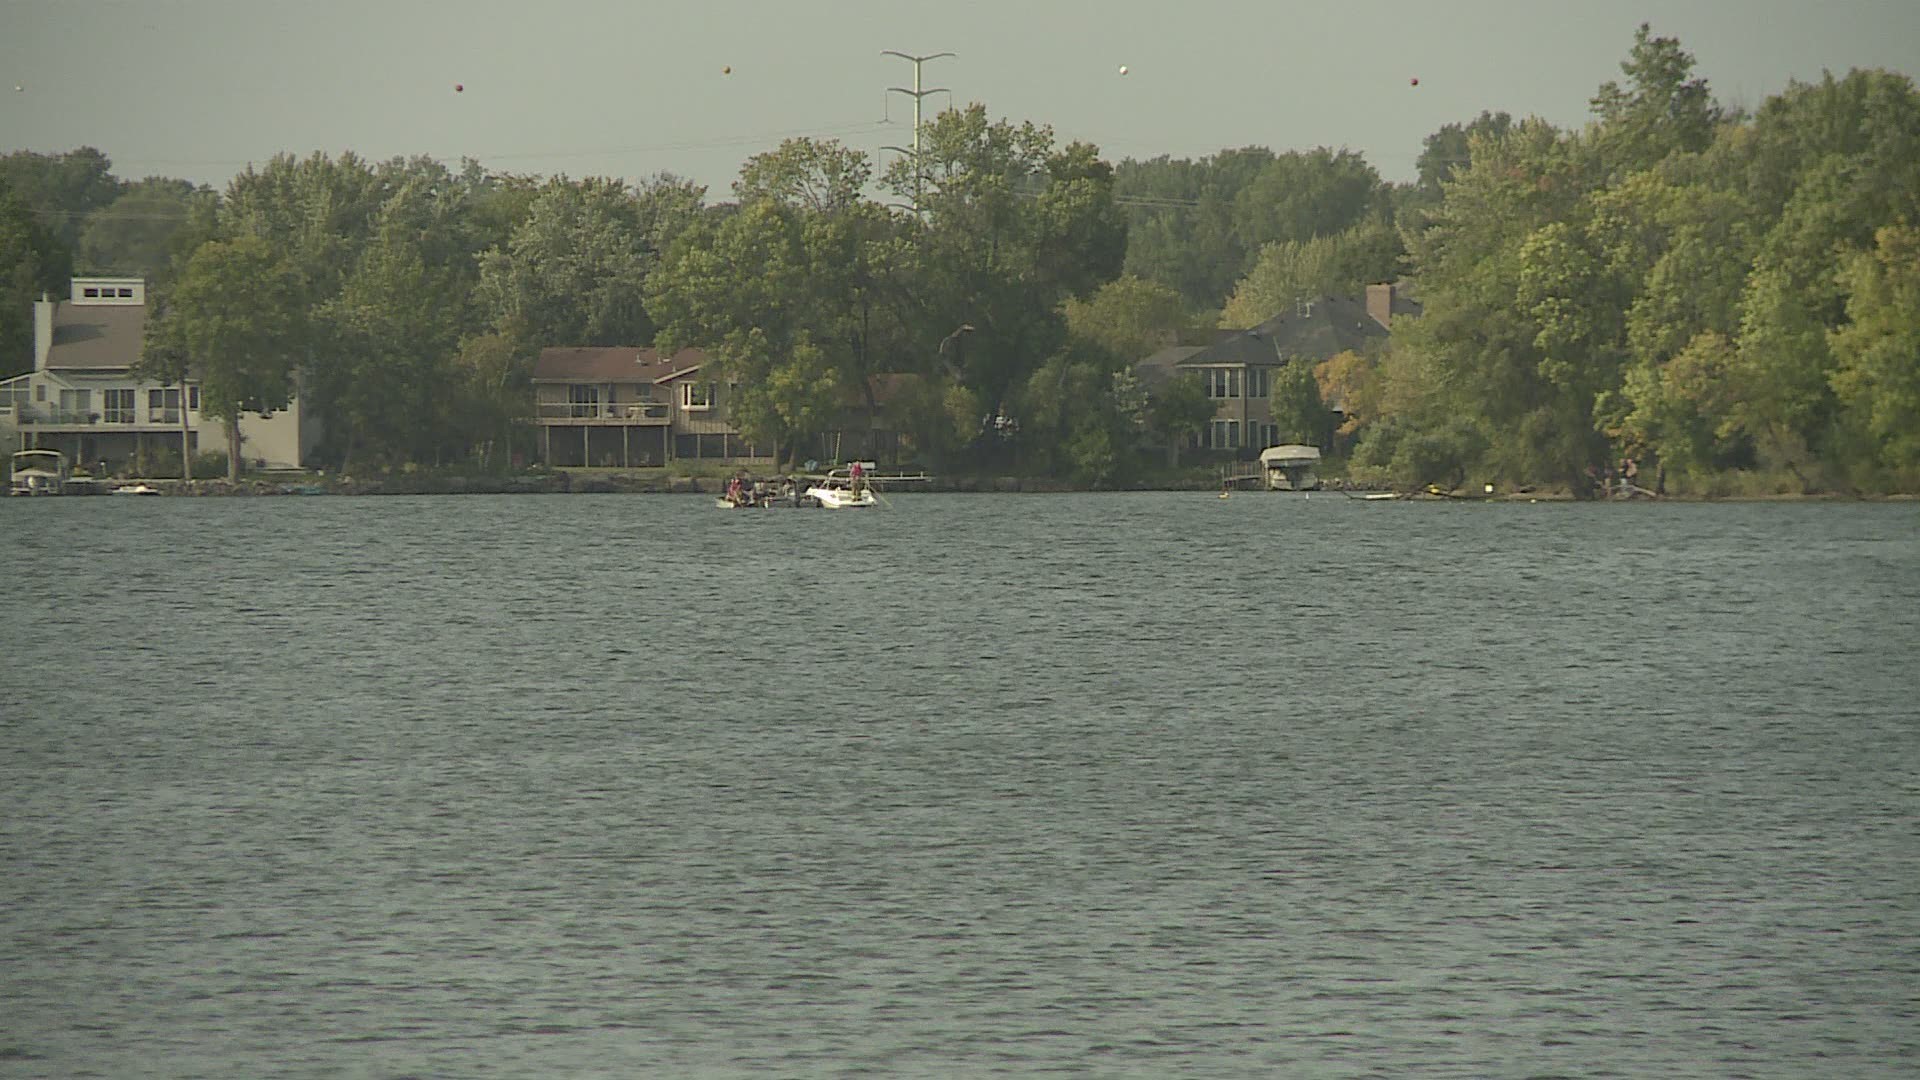 Deputies were called to Long Lake just before 3 p.m. on Saturday for a report of a woman who had fallen out of a kayak and never resurfaced.